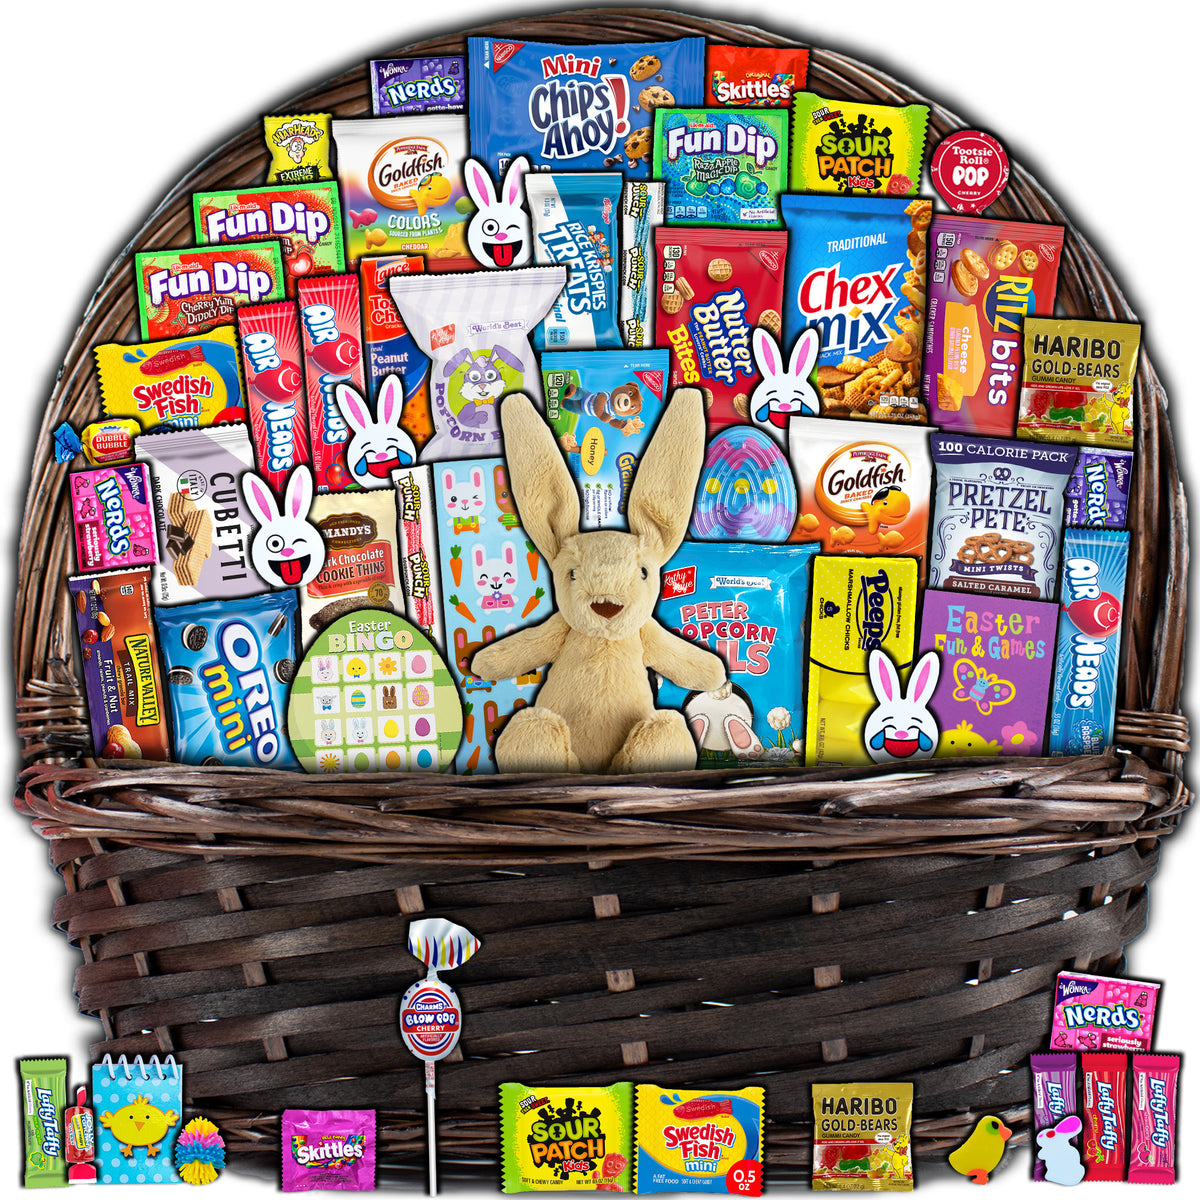 Cricket box Easter Basket For older kids that like to fish